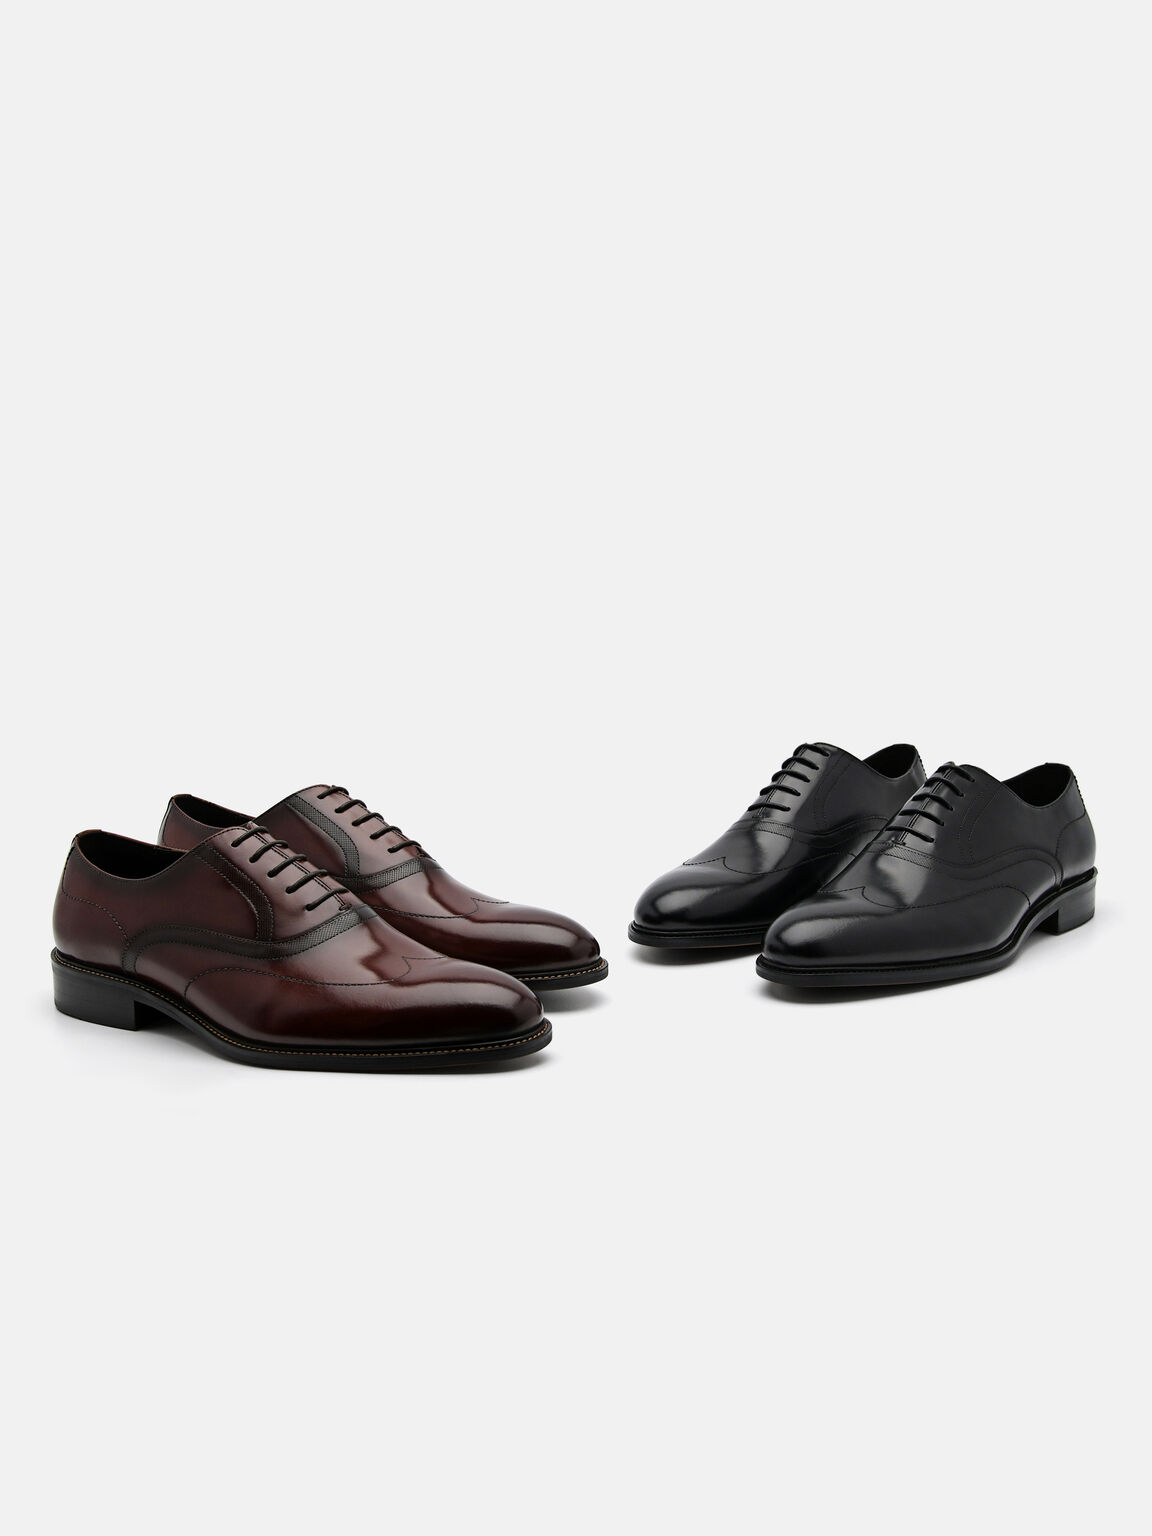 Leather Wingtip Oxford Shoes, Brown